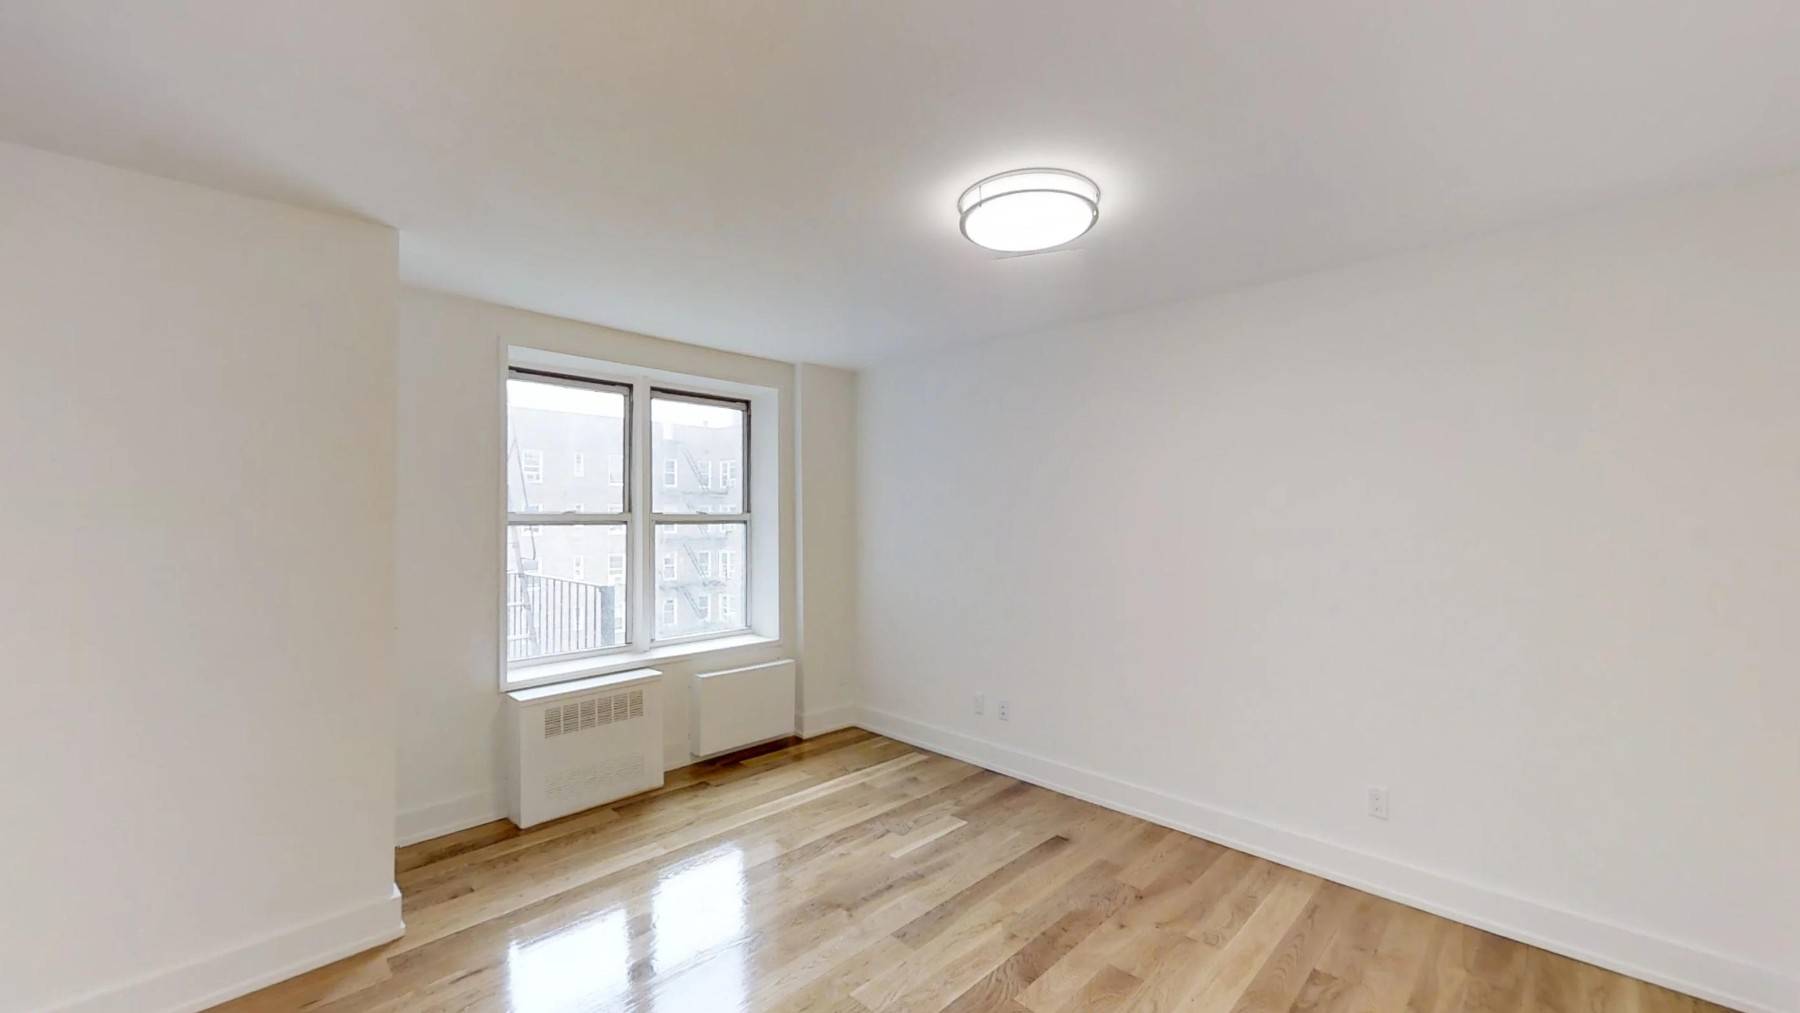 This modern, gut renovated one bedroom apartment features new oak hardwood floors, a large living room, separate kitchen with stainless steel appliances and a glass tiled back splash, sparkling new ...